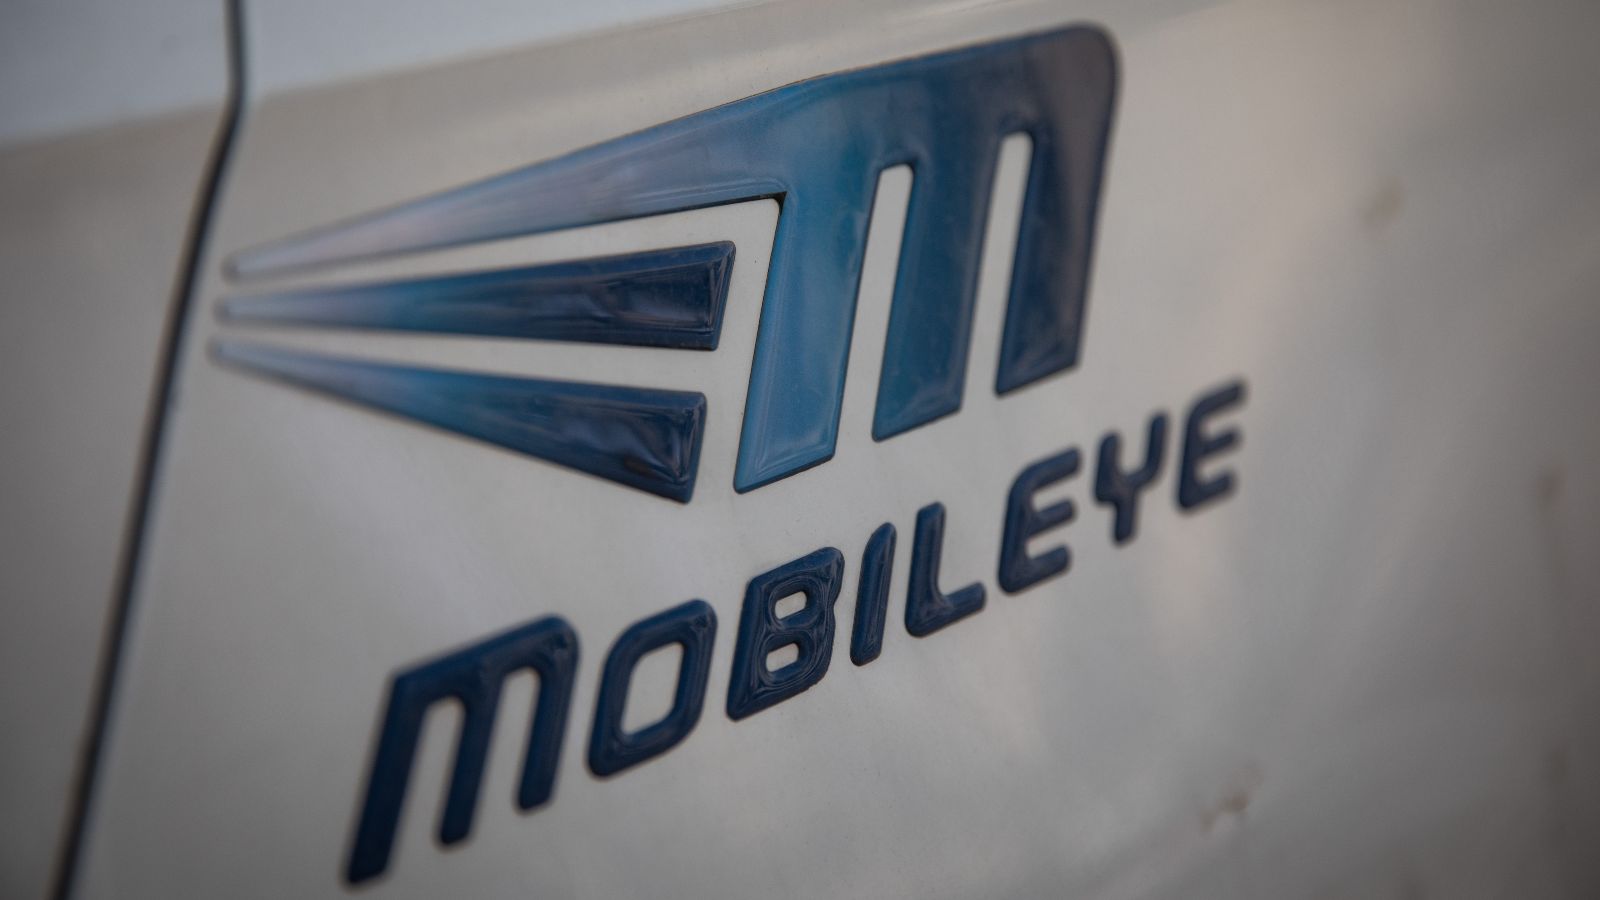 Mobileye unveils its driverless robotaxi, set to hit the roads of Munich in 2022. Photo by Yonatan Sindel/Flash90